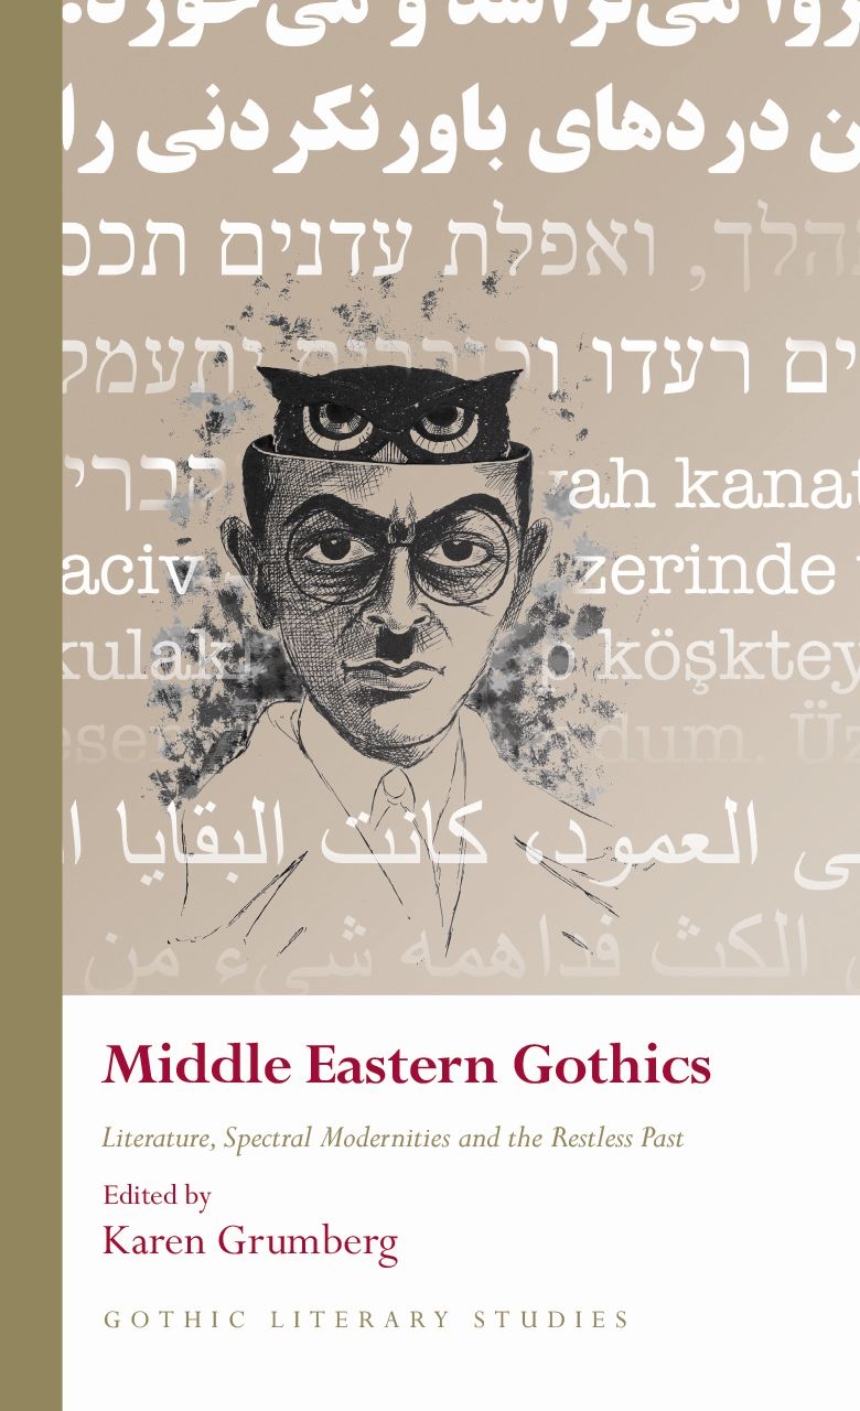 Middle Eastern Gothics